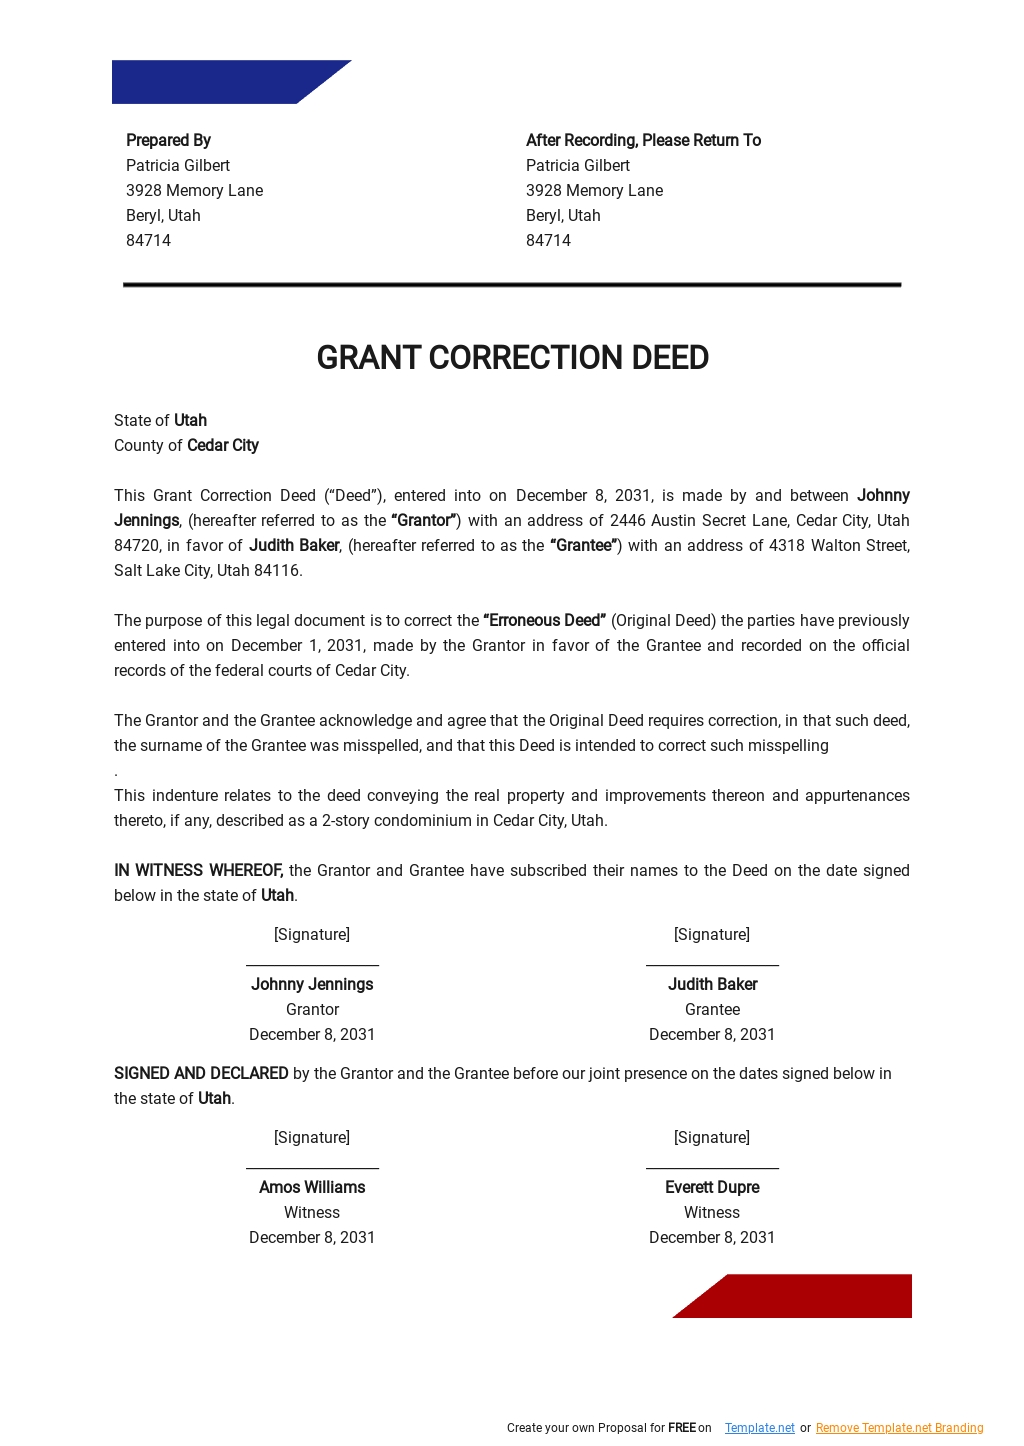 Grant Correction Deed Template